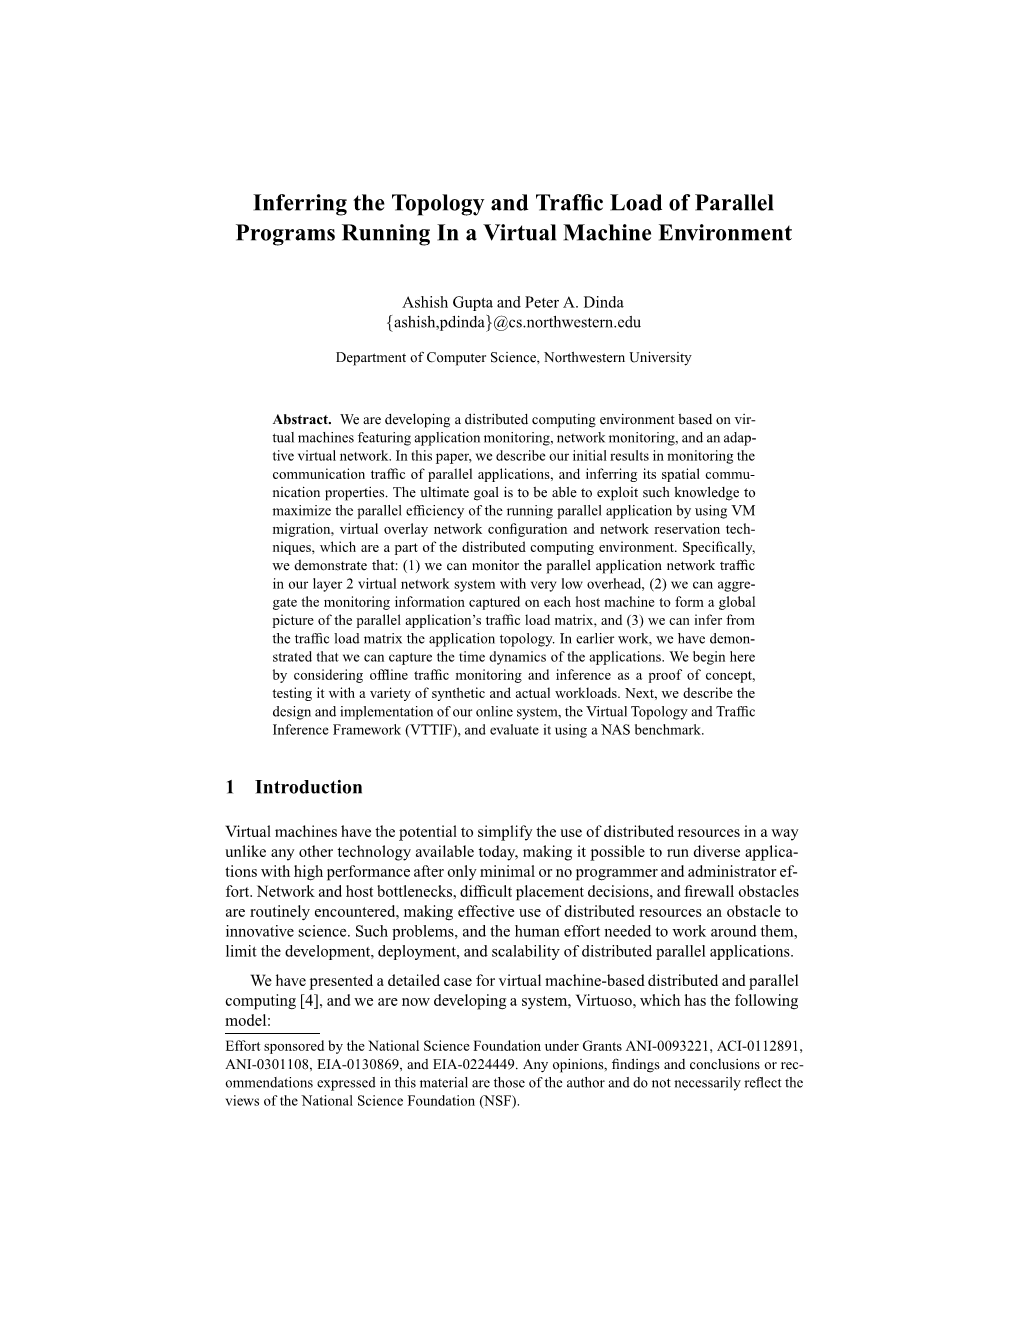 Inferring the Topology and Traffic Load of Parallel Programs Running